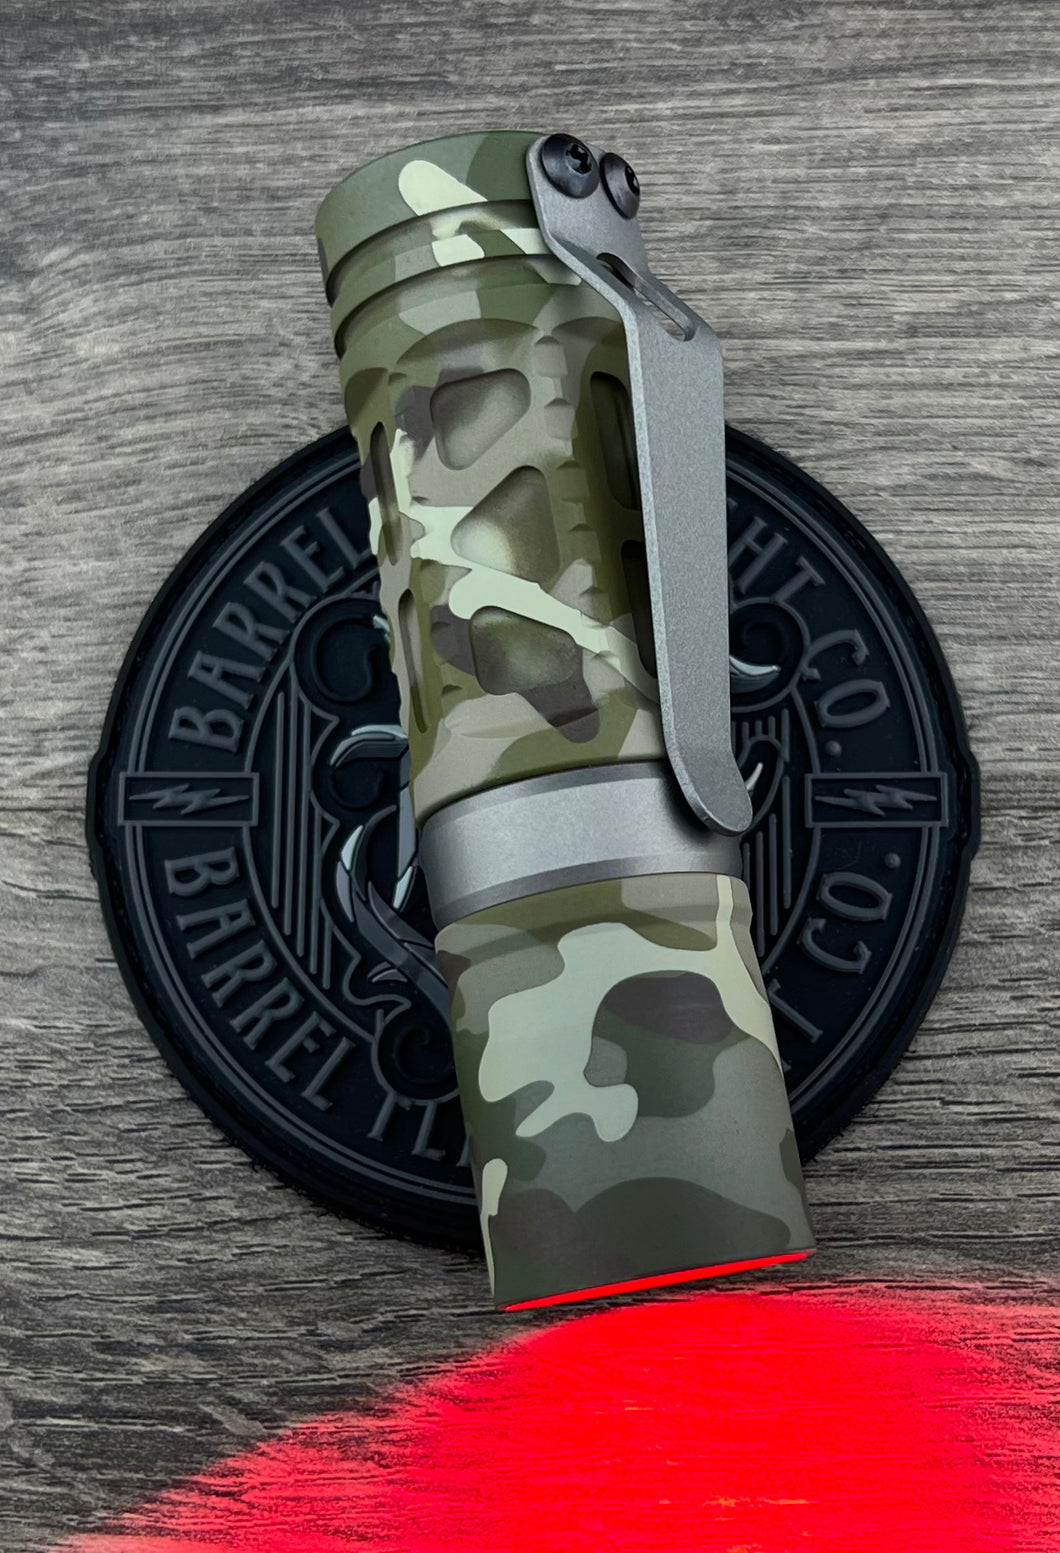 Barrel 6 Picatinny Non Vented Aluminum Rail MultiCam Dragon Driver with Red Secondary. Grey Cerakote Ring and Clip.